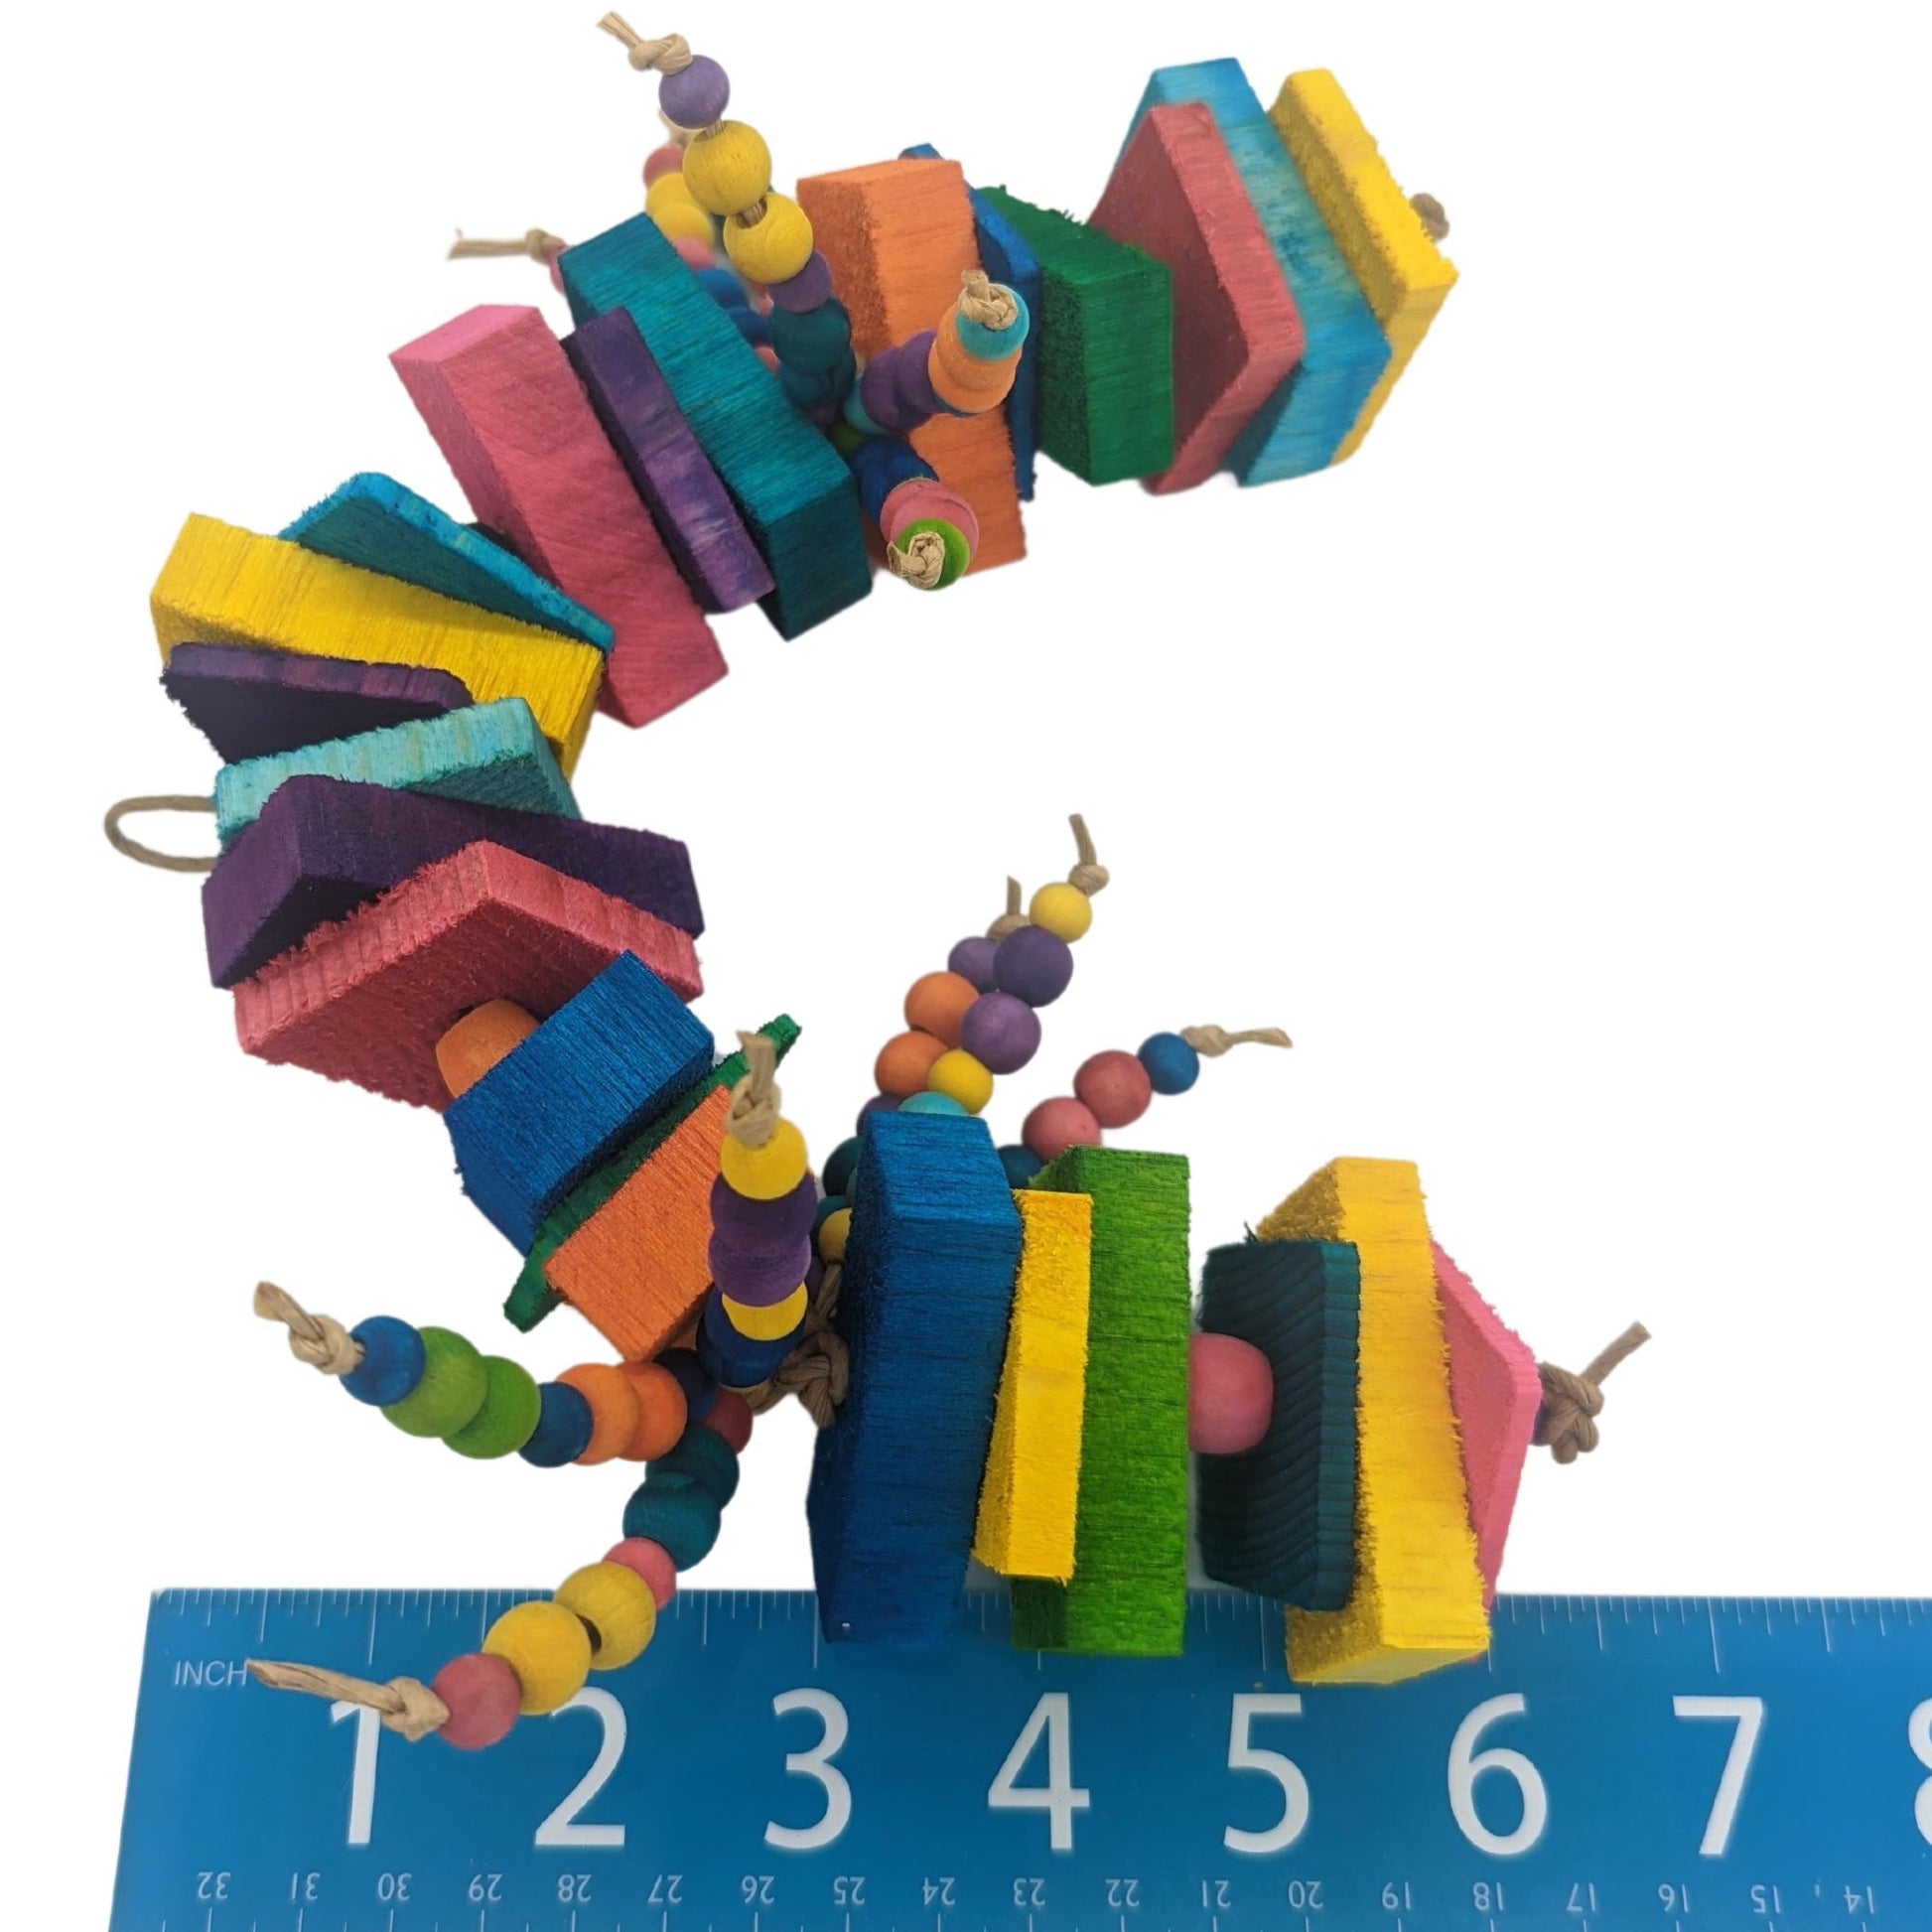 A brightly colored parrot toy. Has alternating sections of 1/4 inch and 1/8 inch thin pine with 1/2 inch balsa slats, separated by 1/2 inch wooden barrel beads. In the middle of the toy are two sections of 6 strands each of 8mm and 10mm wooden beads.